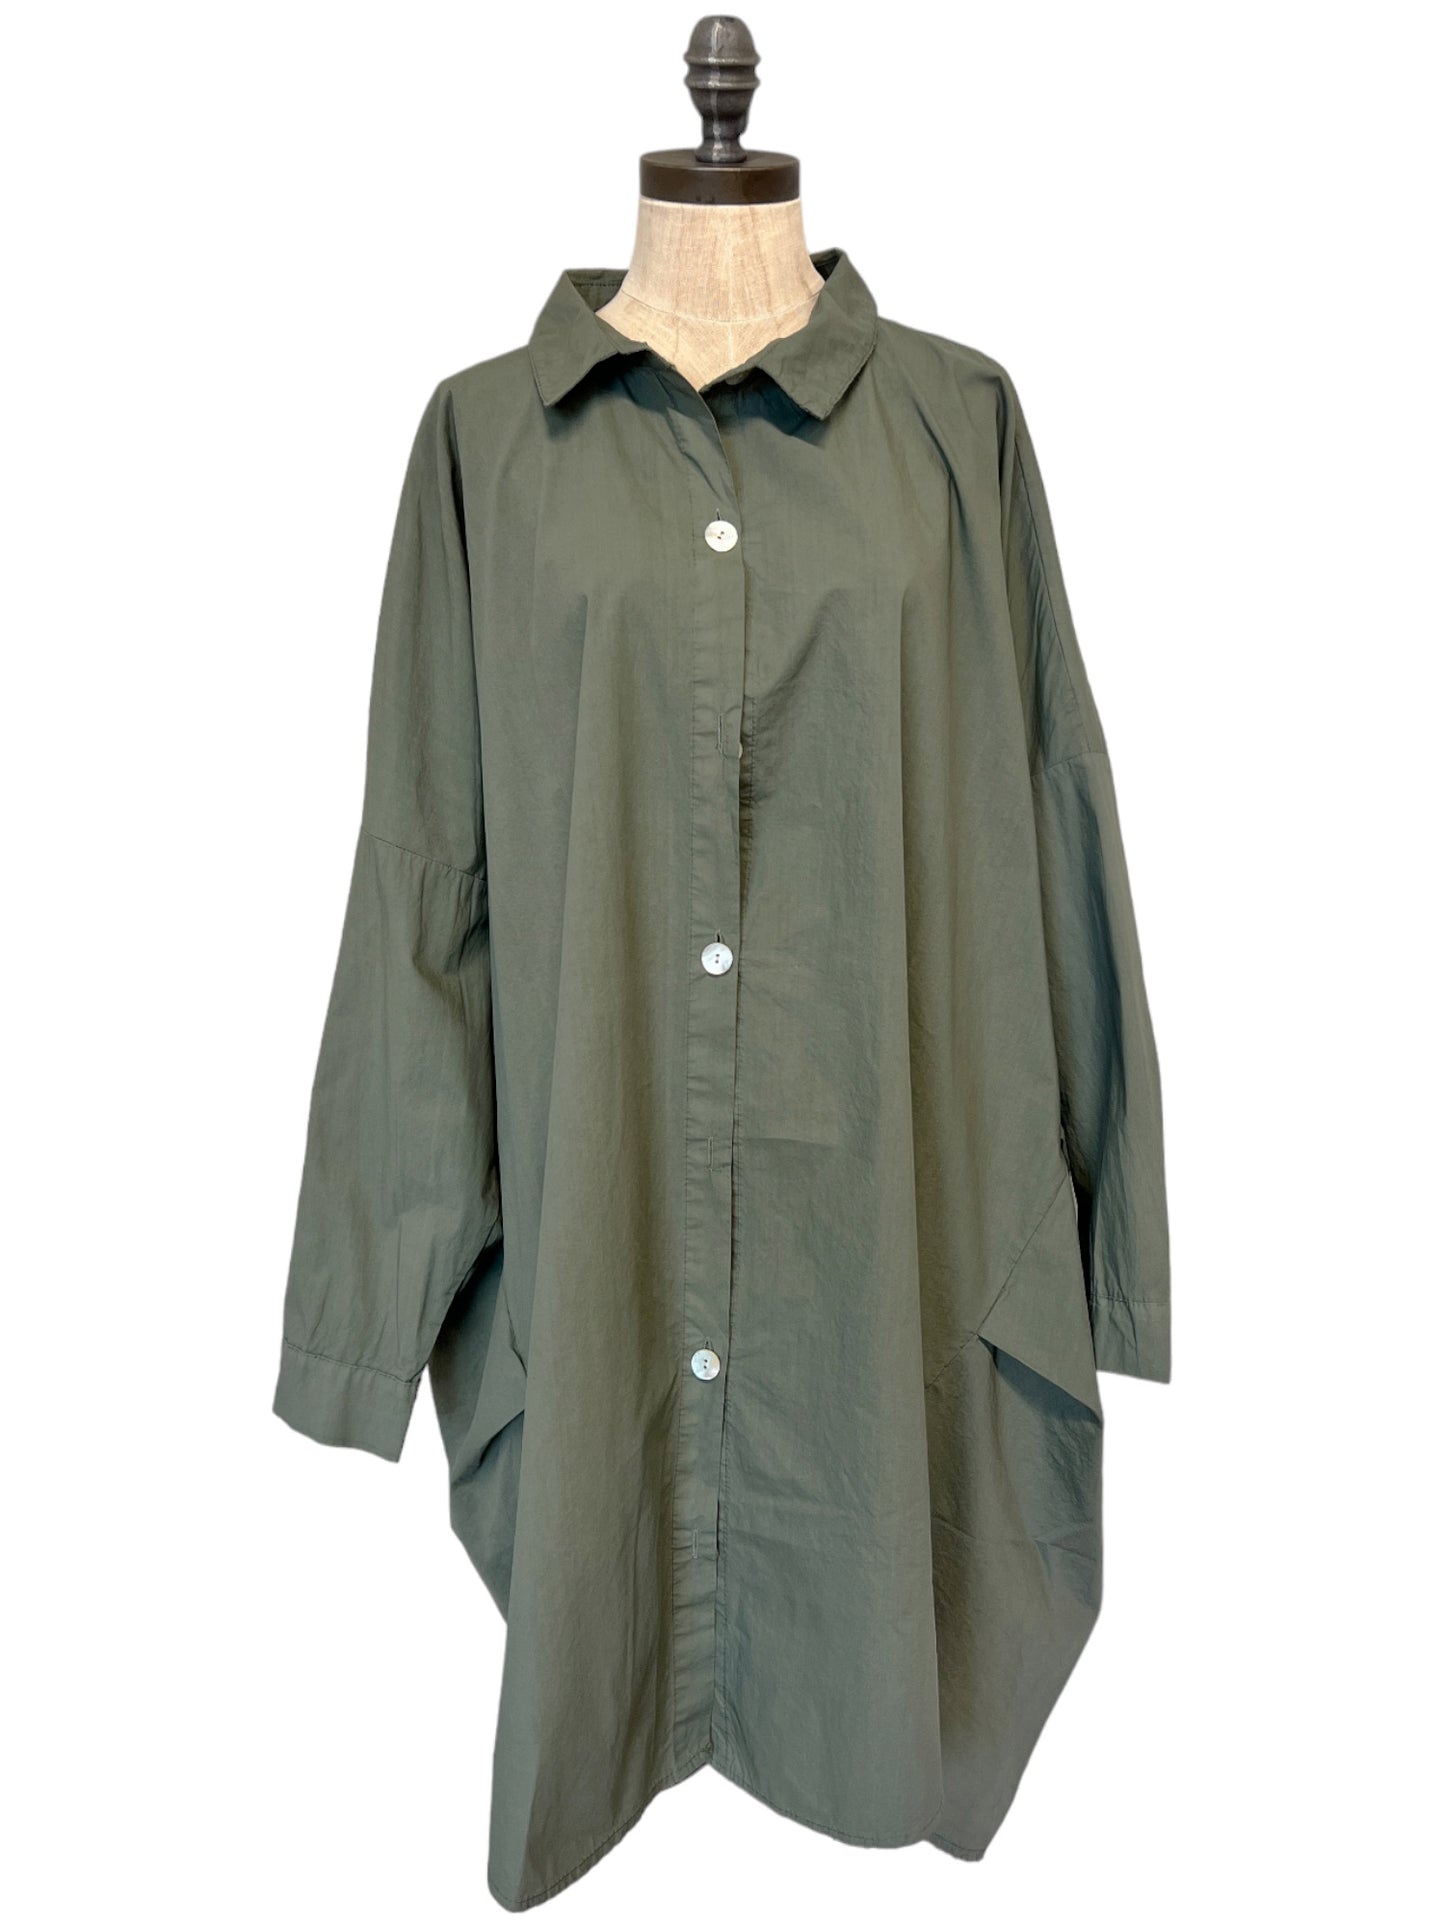 Cocoon Button Front Tunic (2 Colors)